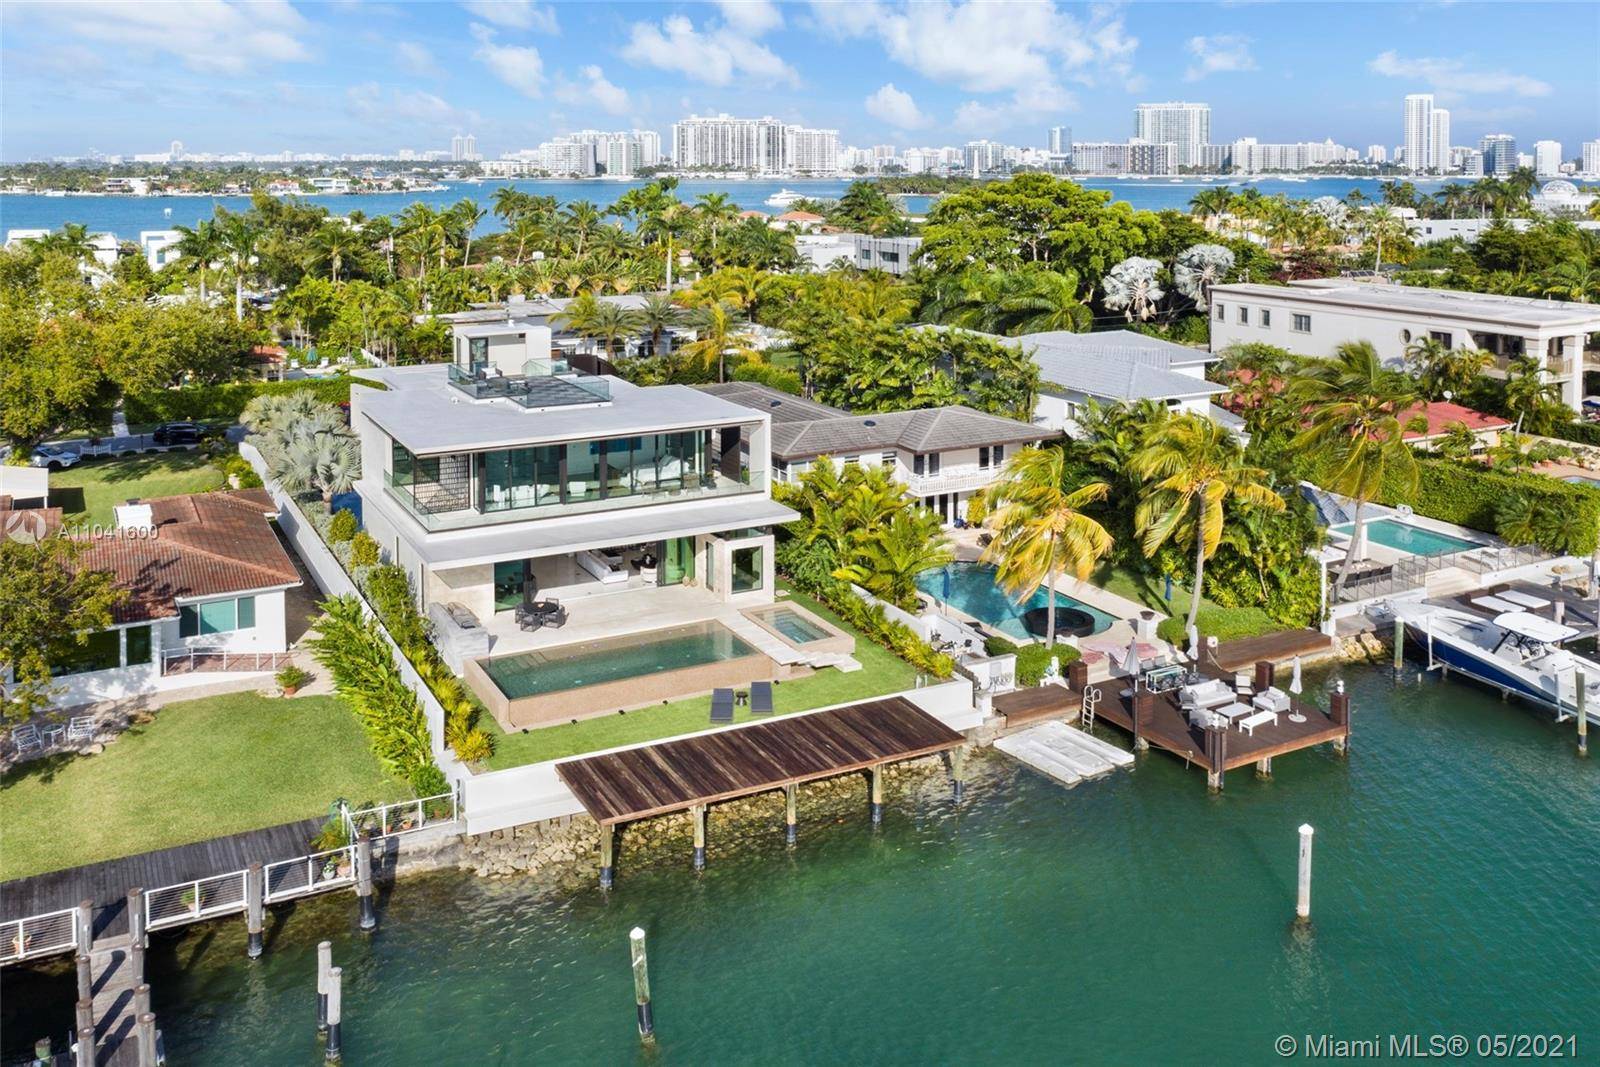 NEW LUXURY WATERFRONT VILLA on one of Miami Beach s most coveted addresses HIBISCUS ISLAND.